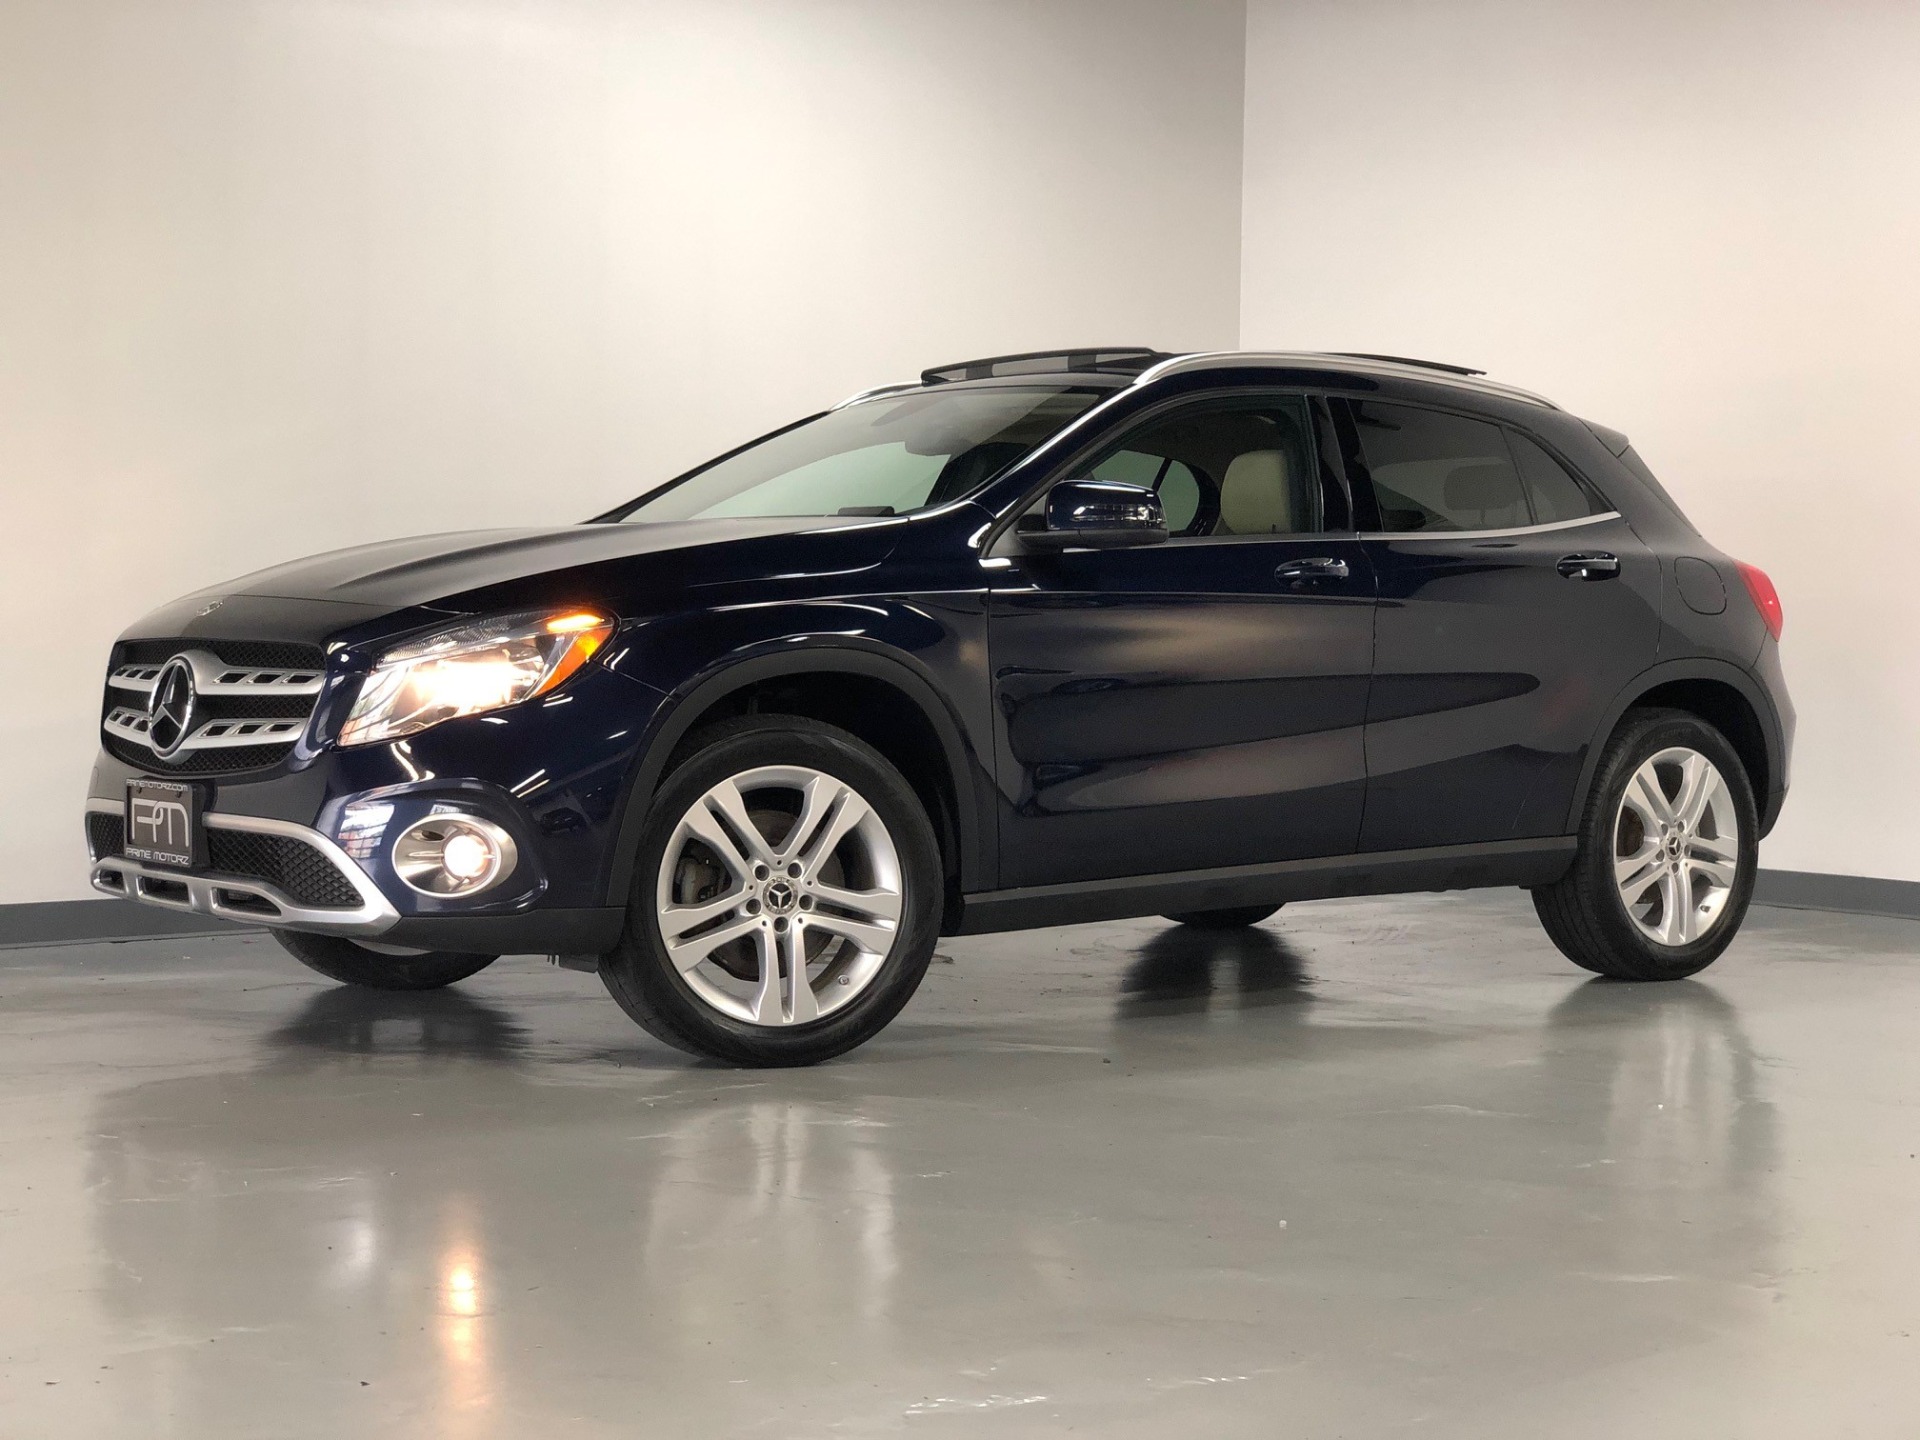 Used 18 Lunar Blue Metallic Mercedes Benz Gla250 Awd Gla 250 4matic For Sale Sold Prime Motorz Stock 2879